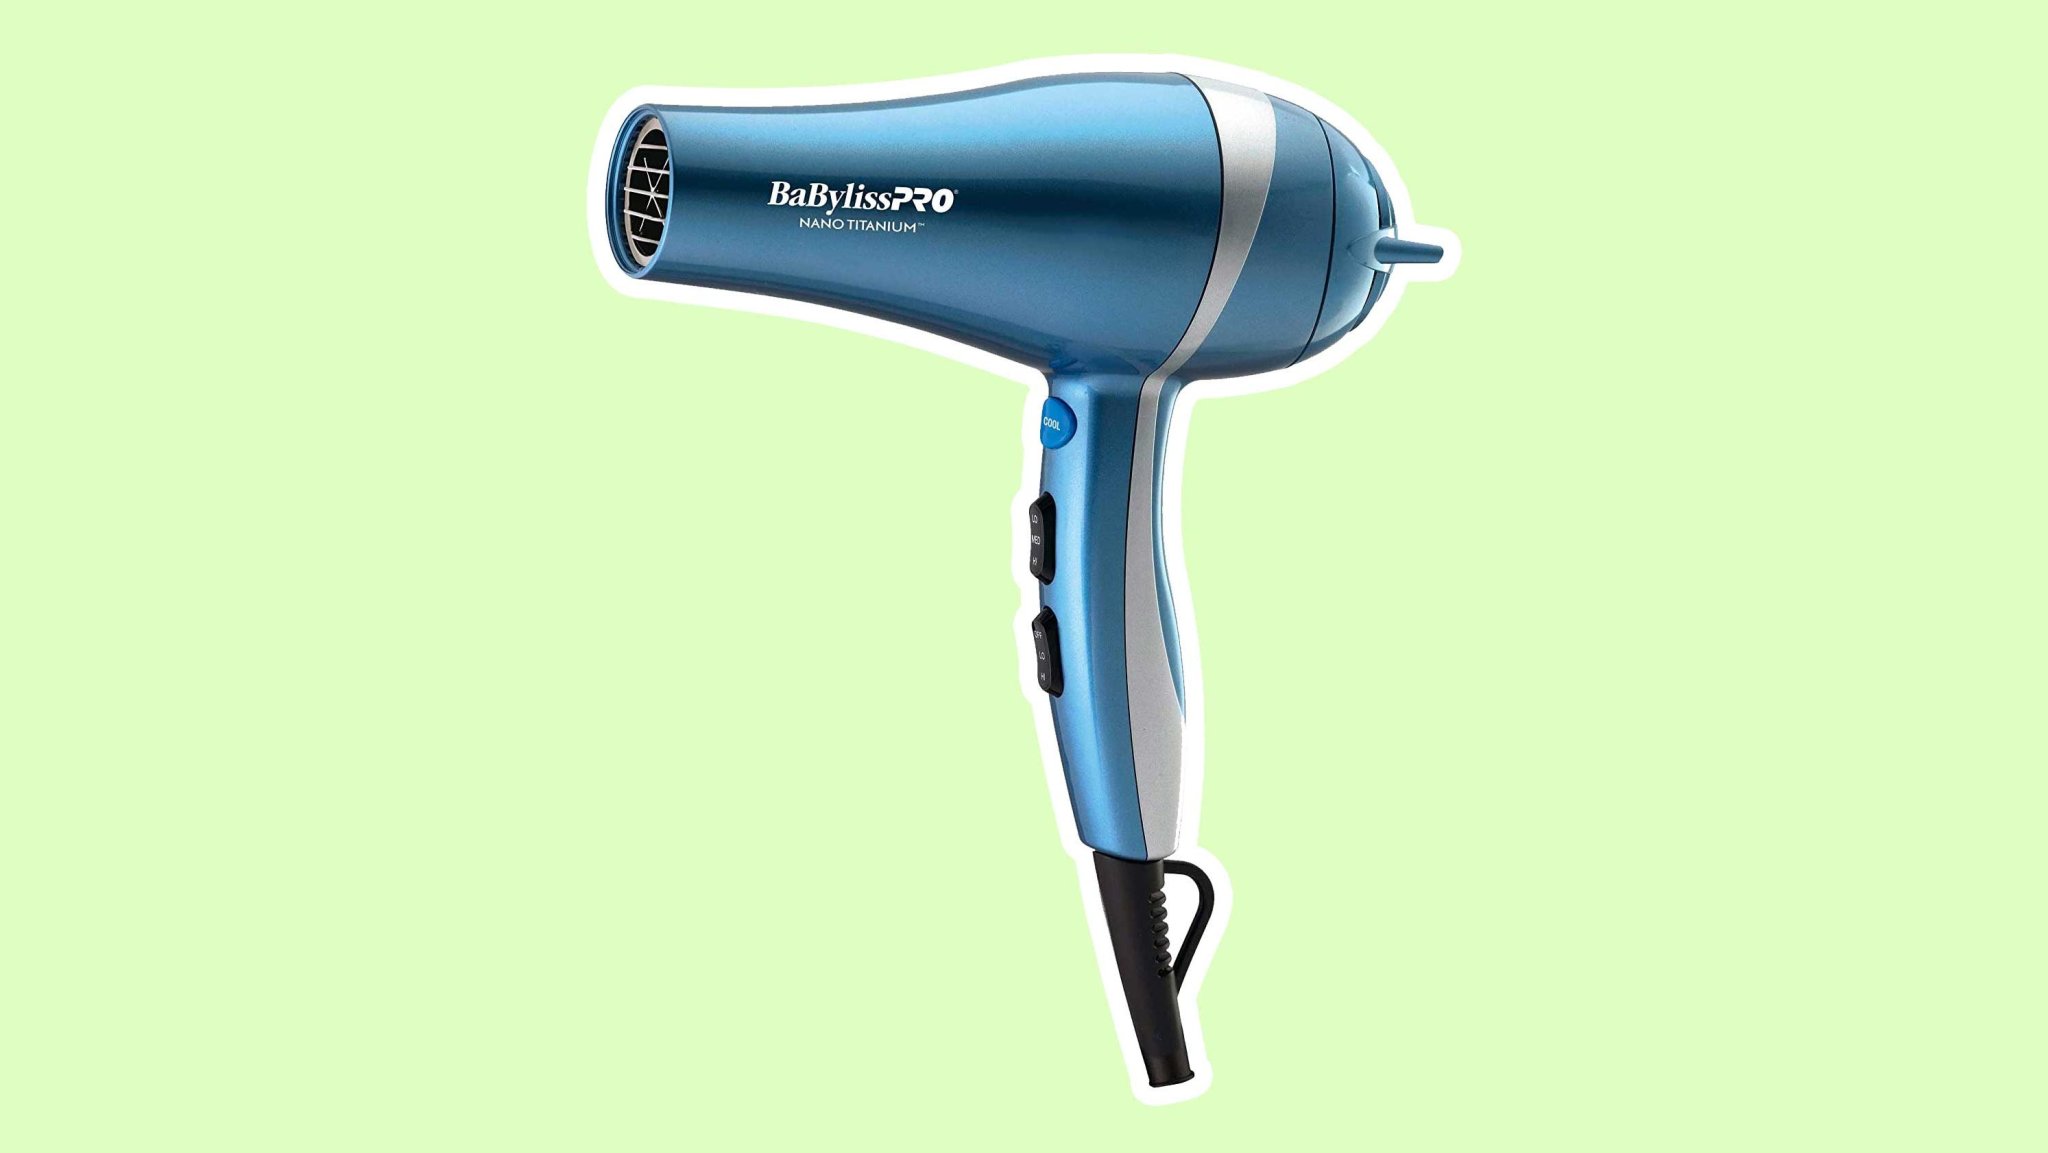 Our readers can't get enough of this Amazon deal on the BaByliss Pro hair dryer